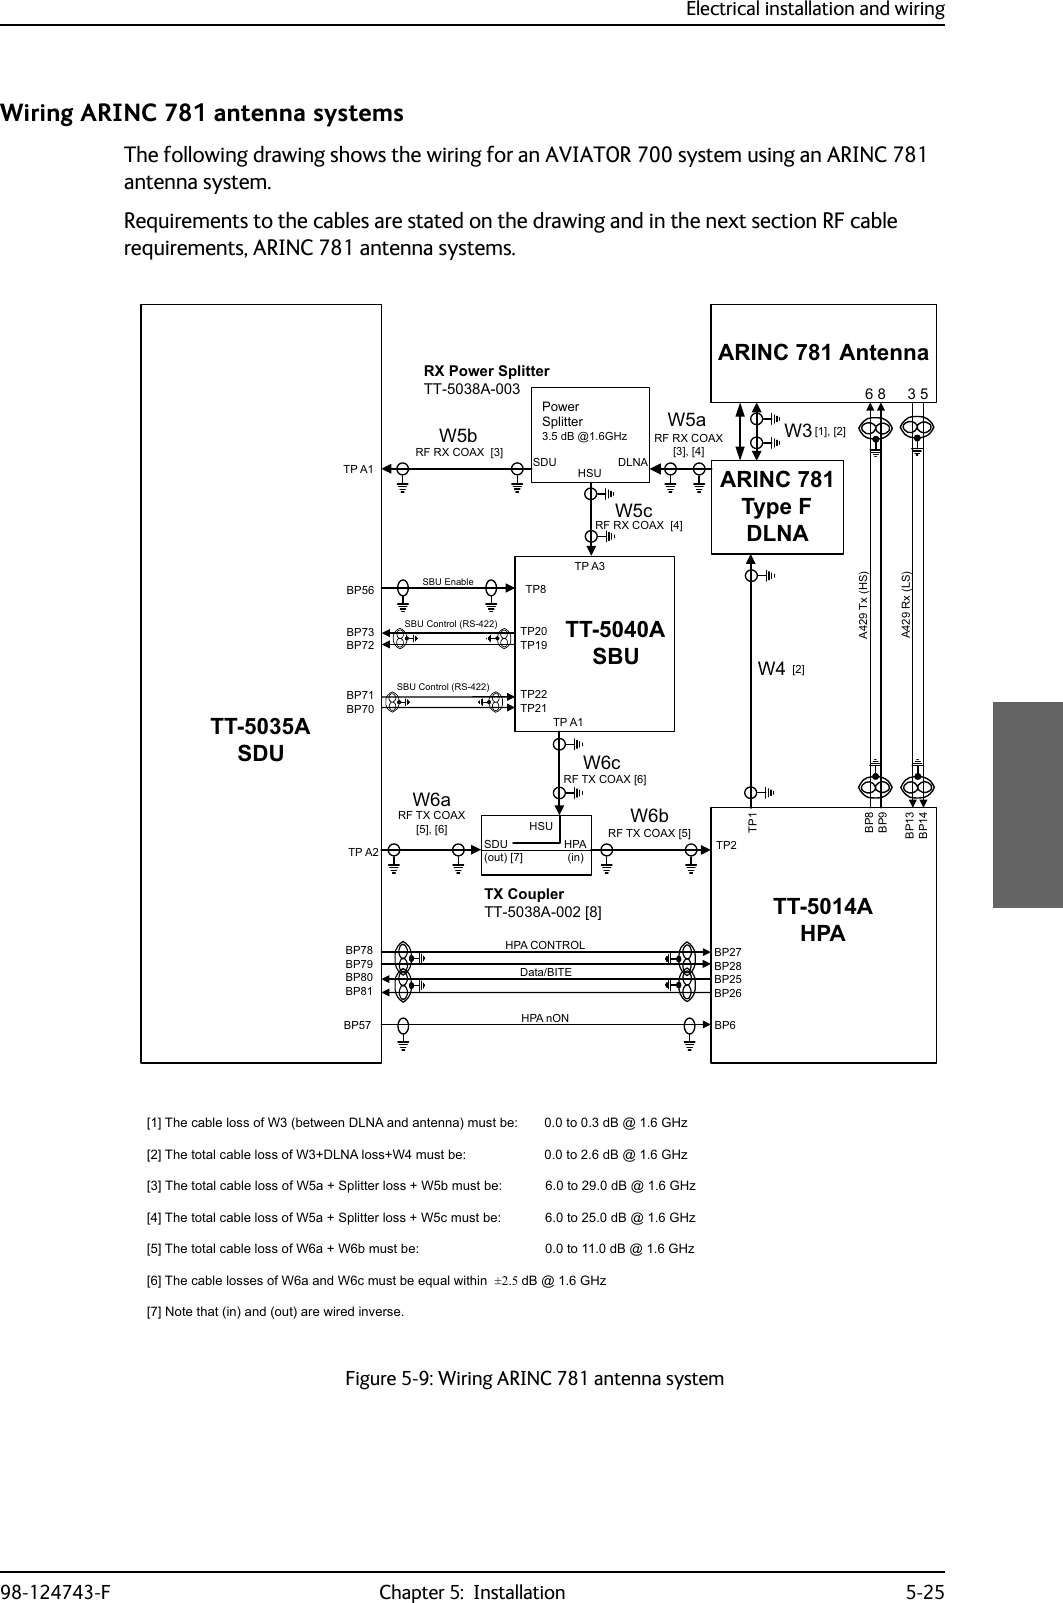 Electrical installation and wiring98-124743-F Chapter 5:  Installation 5-25Wiring ARINC 781 antenna systemsThe following drawing shows the wiring for an AVIATOR 700 system using an ARINC 781 antenna system.Requirements to the cables are stated on the drawing and in the next section RF cable requirements, ARINC 781 antenna systems.Figure 5-9: Wiring ARINC 781 antenna system7;&amp;RXSOHU77$&gt;@77$6&apos;8$5,1&amp;$QWHQQD$5,1&amp;7\SH)&apos;/1$3RZHU6SOLWWHUG%#*+]+686&apos;8 &apos;/1$5;3RZHU6SOLWWHU77$77$6%86%8&amp;RQWURO56%3%3%3%3%373737373736%8&amp;RQWURO566%8(QDEOH73$73$6&apos;8RXW&gt;@+3$LQ+687377$+3$73%3%3%3%3+3$Q21%3 %3%3%3%3%3+3$&amp;21752/&apos;DWD%,7(73$73$5)5;&amp;2$;&gt;@&gt;@5)5;&amp;2$;&gt;@: &gt;@5)7;&amp;2$;&gt;@5)7;&amp;2$;&gt;@&gt;@ 5)7;&amp;2$;&gt;@5)5;&amp;2$;&gt;@&gt;@7KHFDEOHORVVRI:EHWZHHQ&apos;/1$DQGDQWHQQDPXVWEH WRG%#*+]&gt;@7KHWRWDOFDEOHORVVRI:&apos;/1$ORVV:PXVWEH WRG%#*+]&gt;@7KHWRWDOFDEOHORVVRI:D6SOLWWHUORVV:EPXVWEH WRG%#*+]&gt;@7KHWRWDOFDEOHORVVRI:D6SOLWWHUORVV:FPXVWEH WRG%#*+]&gt;@7KHWRWDOFDEOHORVVRI:D:EPXVWEH WRG%#*+]&gt;@7KHFDEOHORVVHVRI:DDQG:FPXVWEHHTXDOZLWKLQG%#*+]&gt;@1RWHWKDWLQDQGRXWDUHZLUHGLQYHUVH:&gt;@&gt;@:E :D:F:F:D :E%3%3%3%3$7[+6$5[/6 